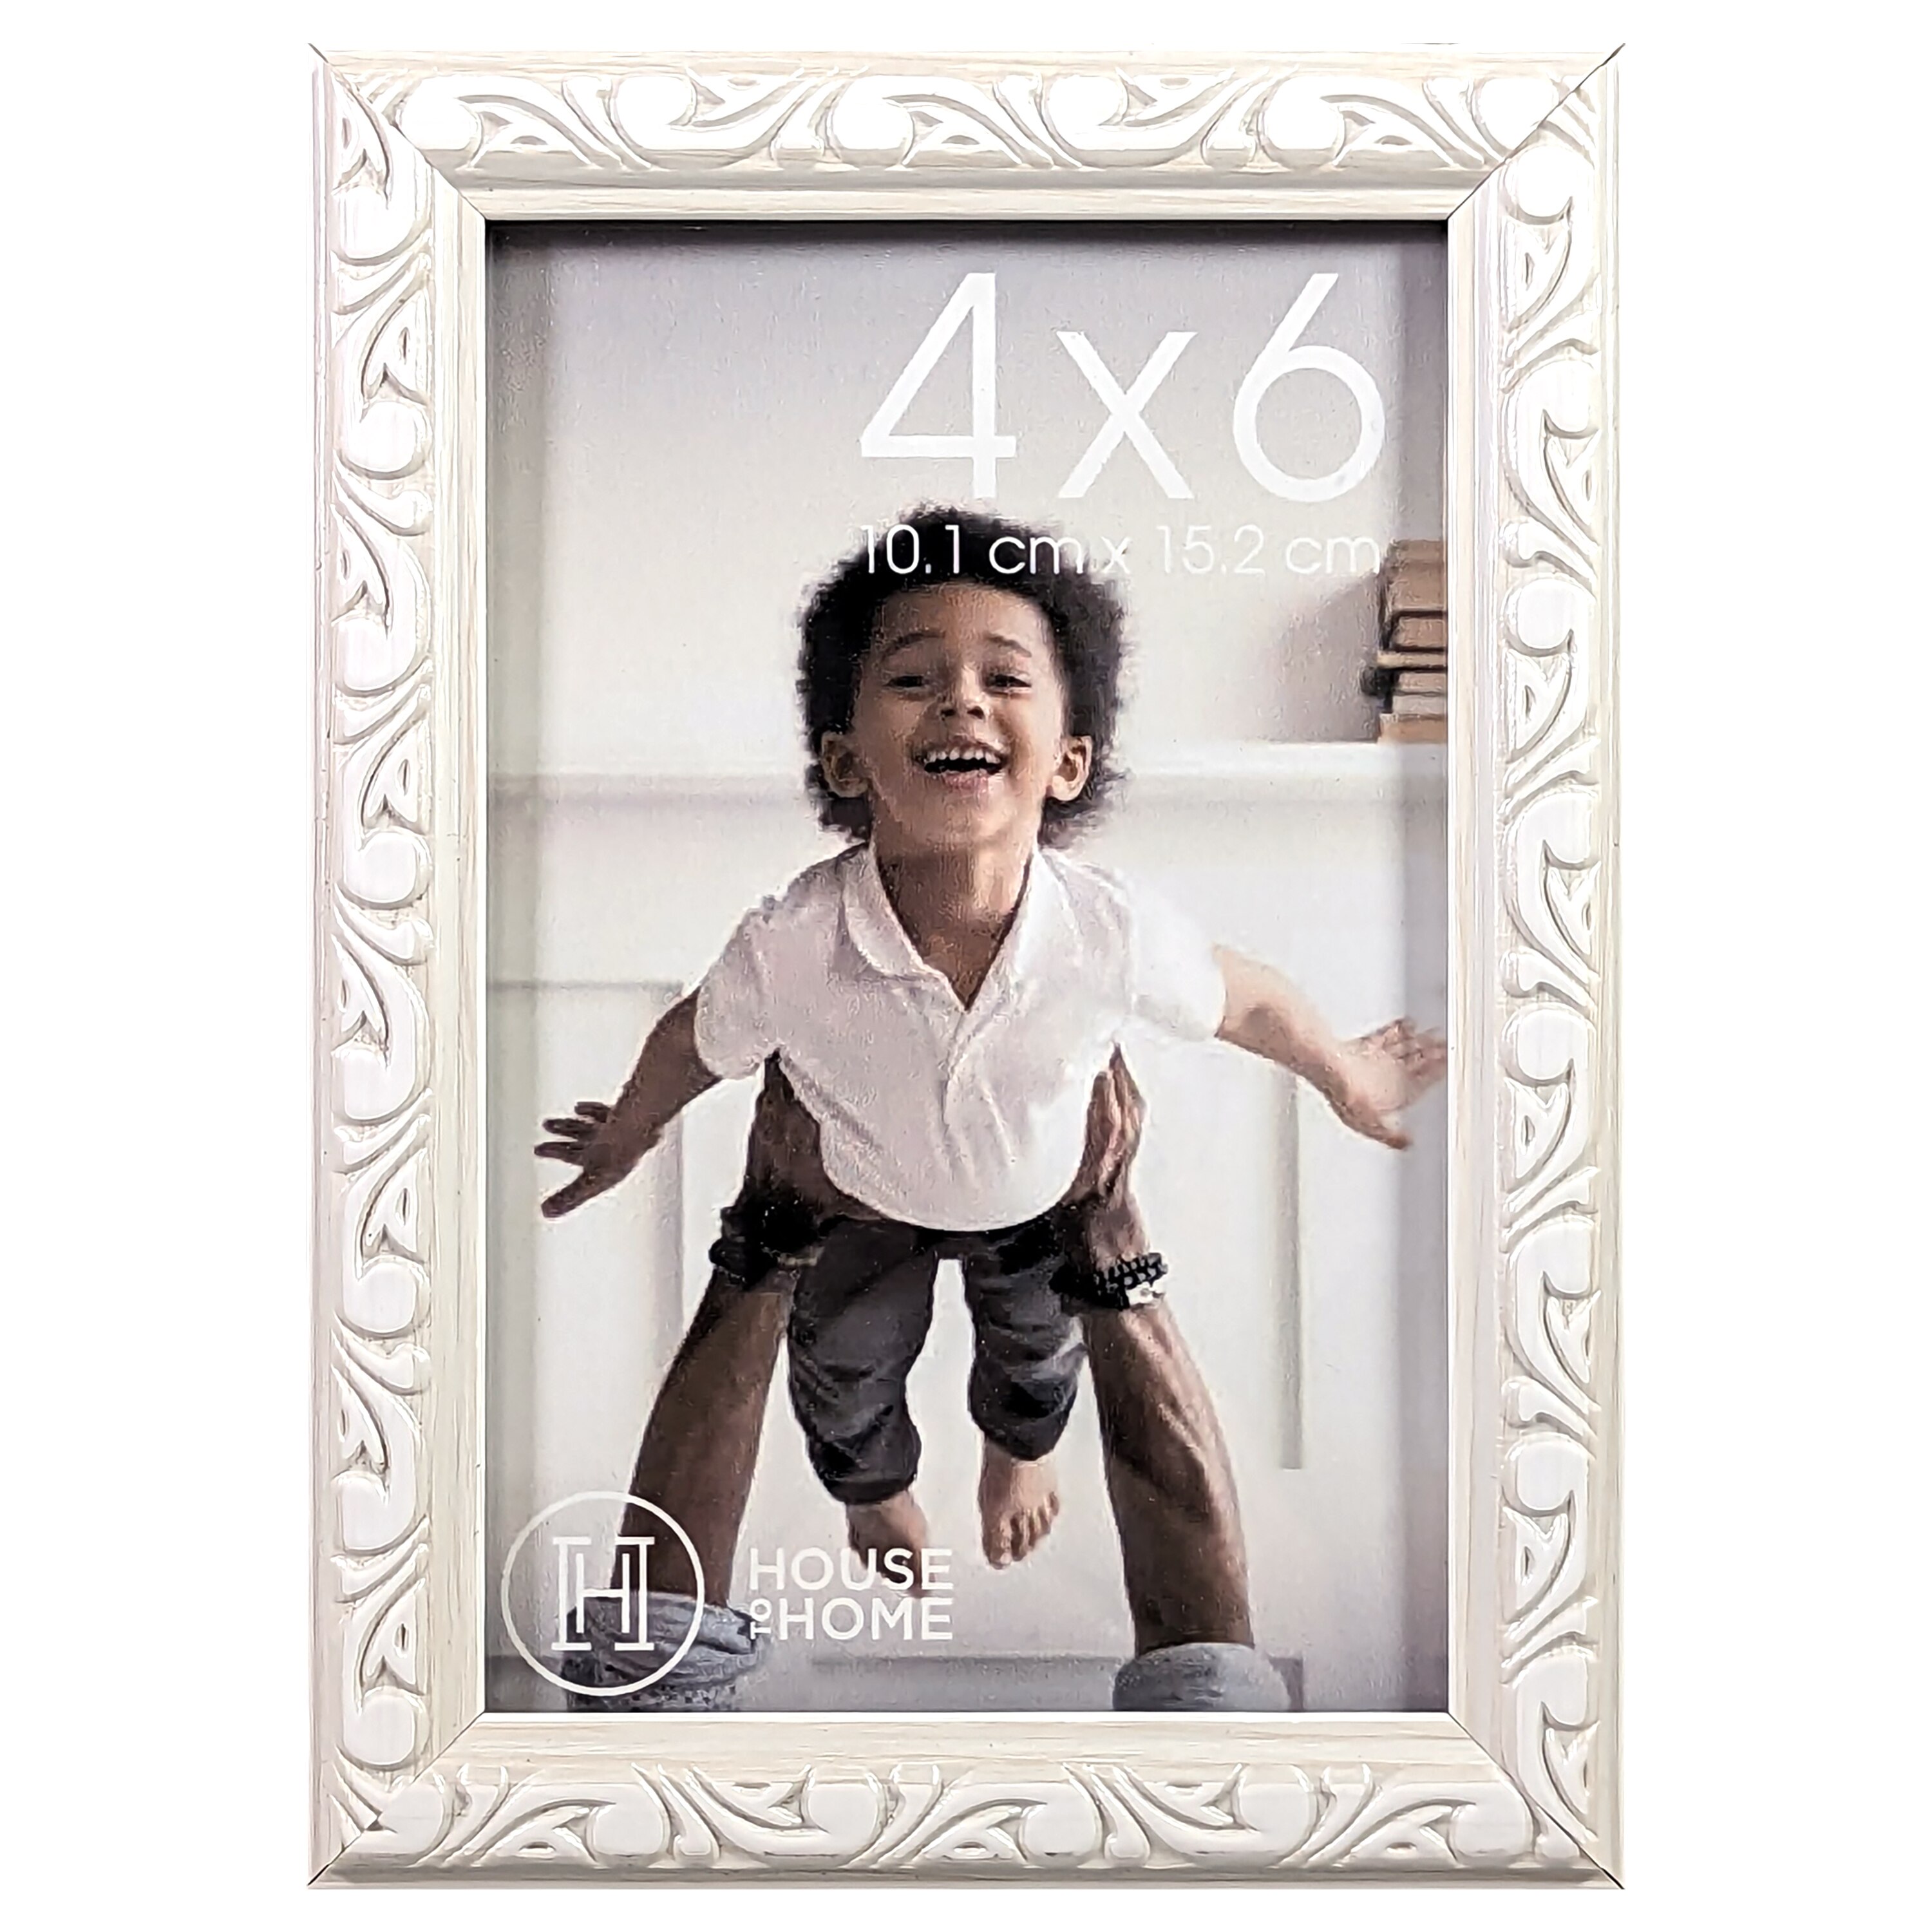 Customer Reviews: House to Home White Picture Frame, 4x6 - CVS Pharmacy